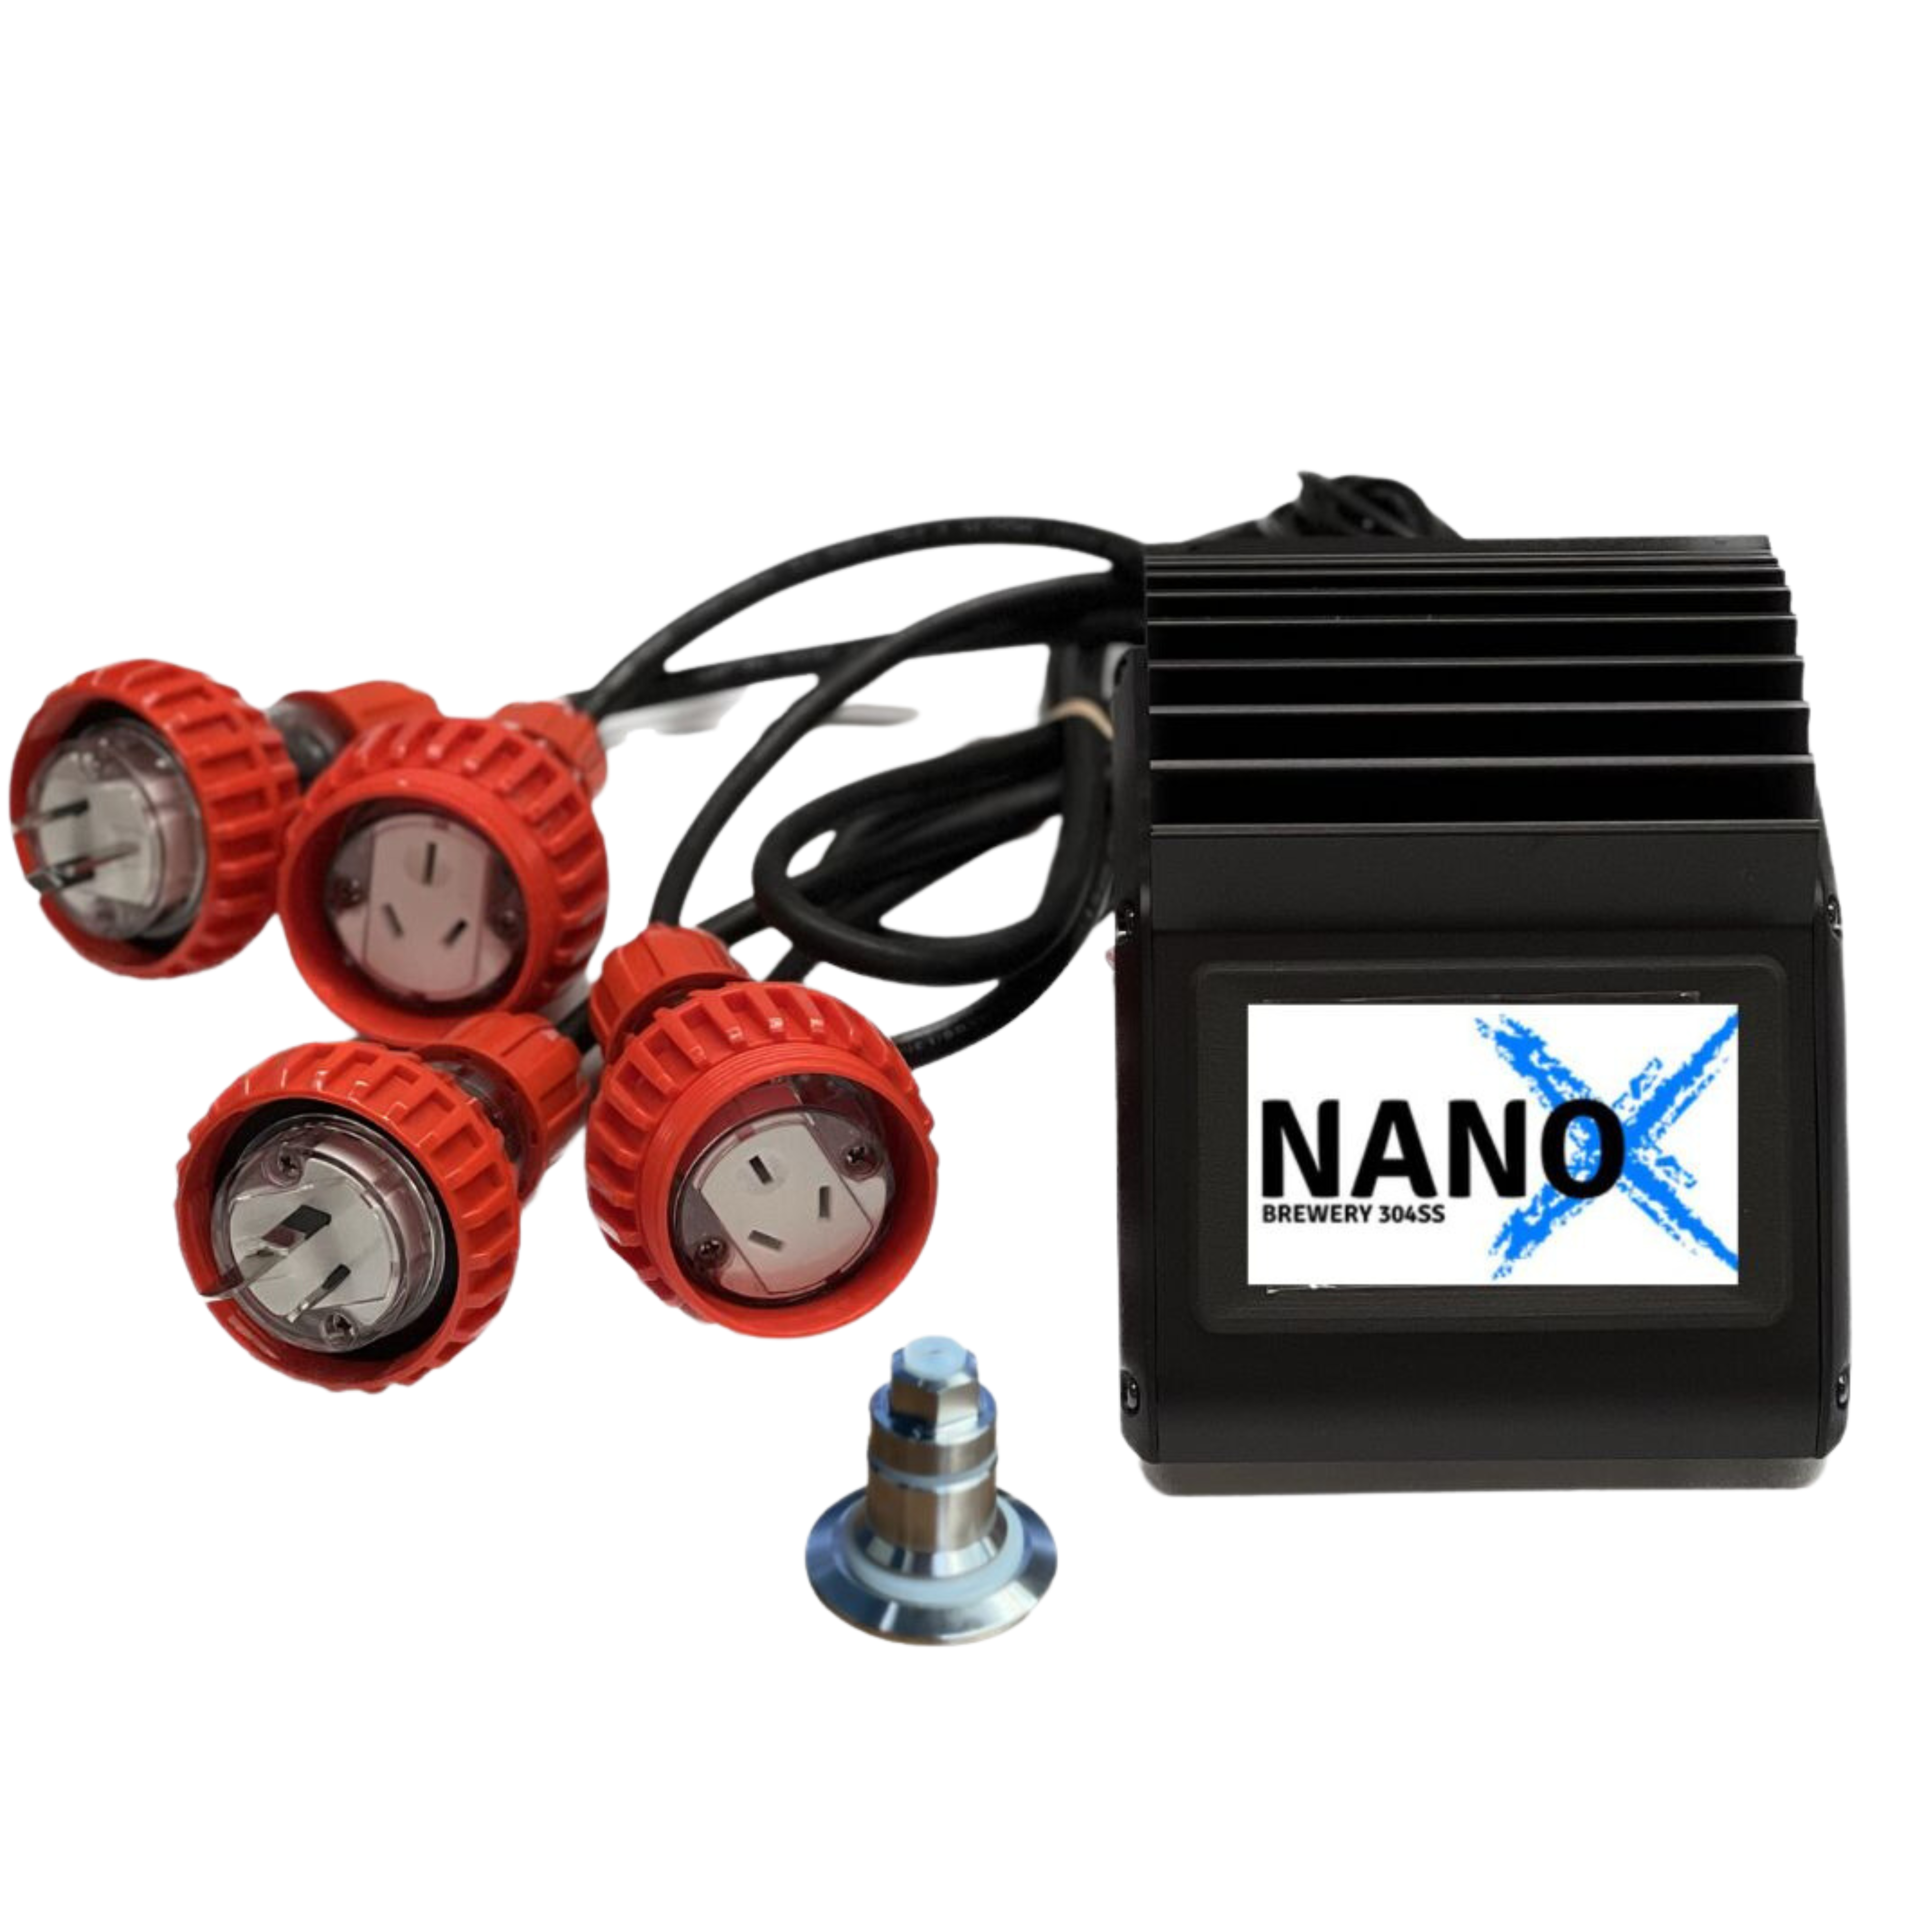 Nano Boss Domestic Controller: 10amp Plugs. Touch Screen PID Controller & Voltage Control